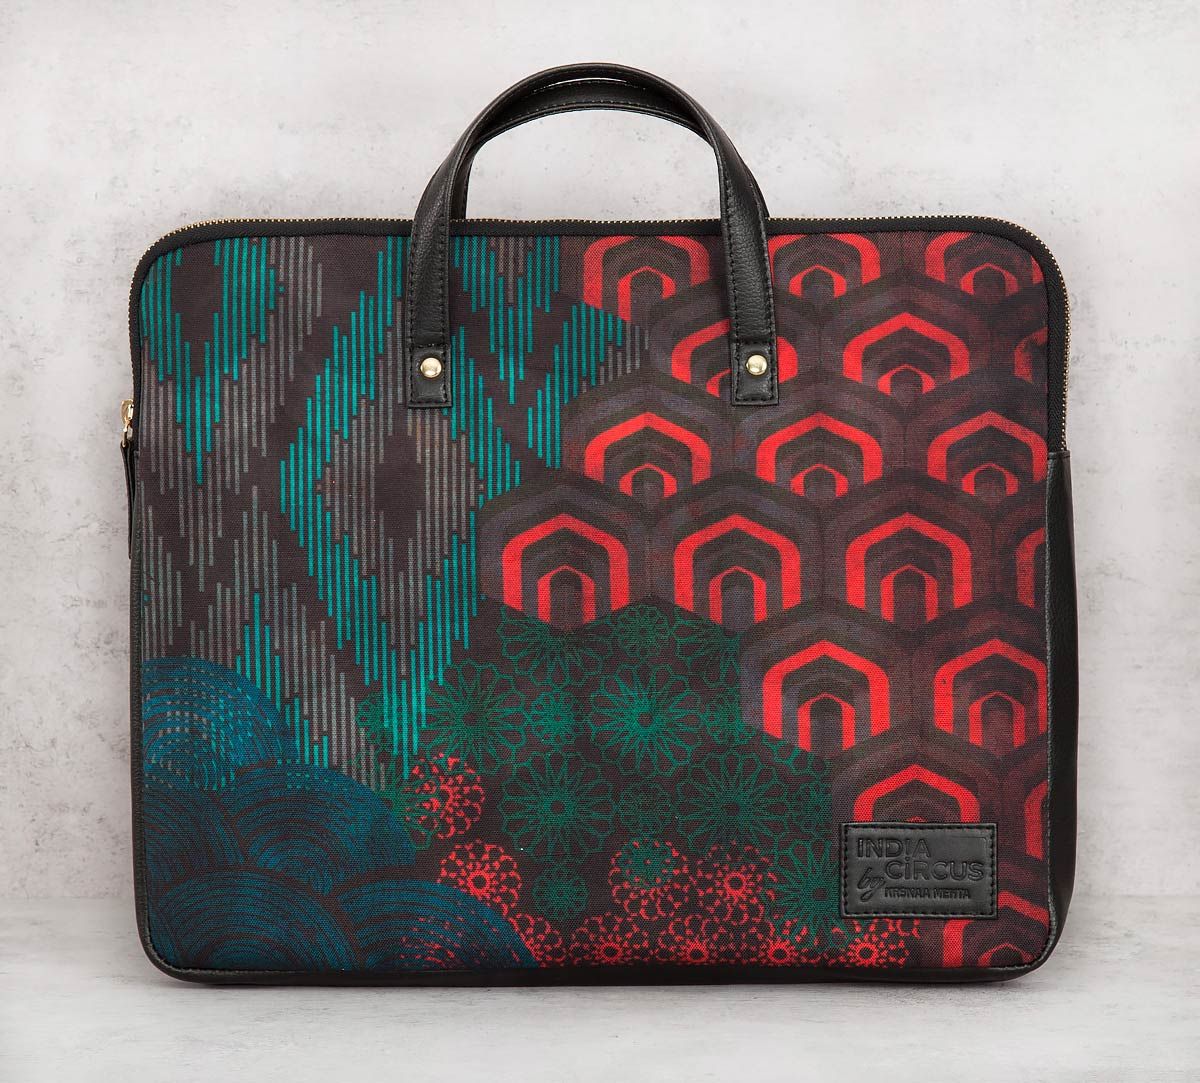 India Circus Forests of Fantasy Wall Laptop Bag